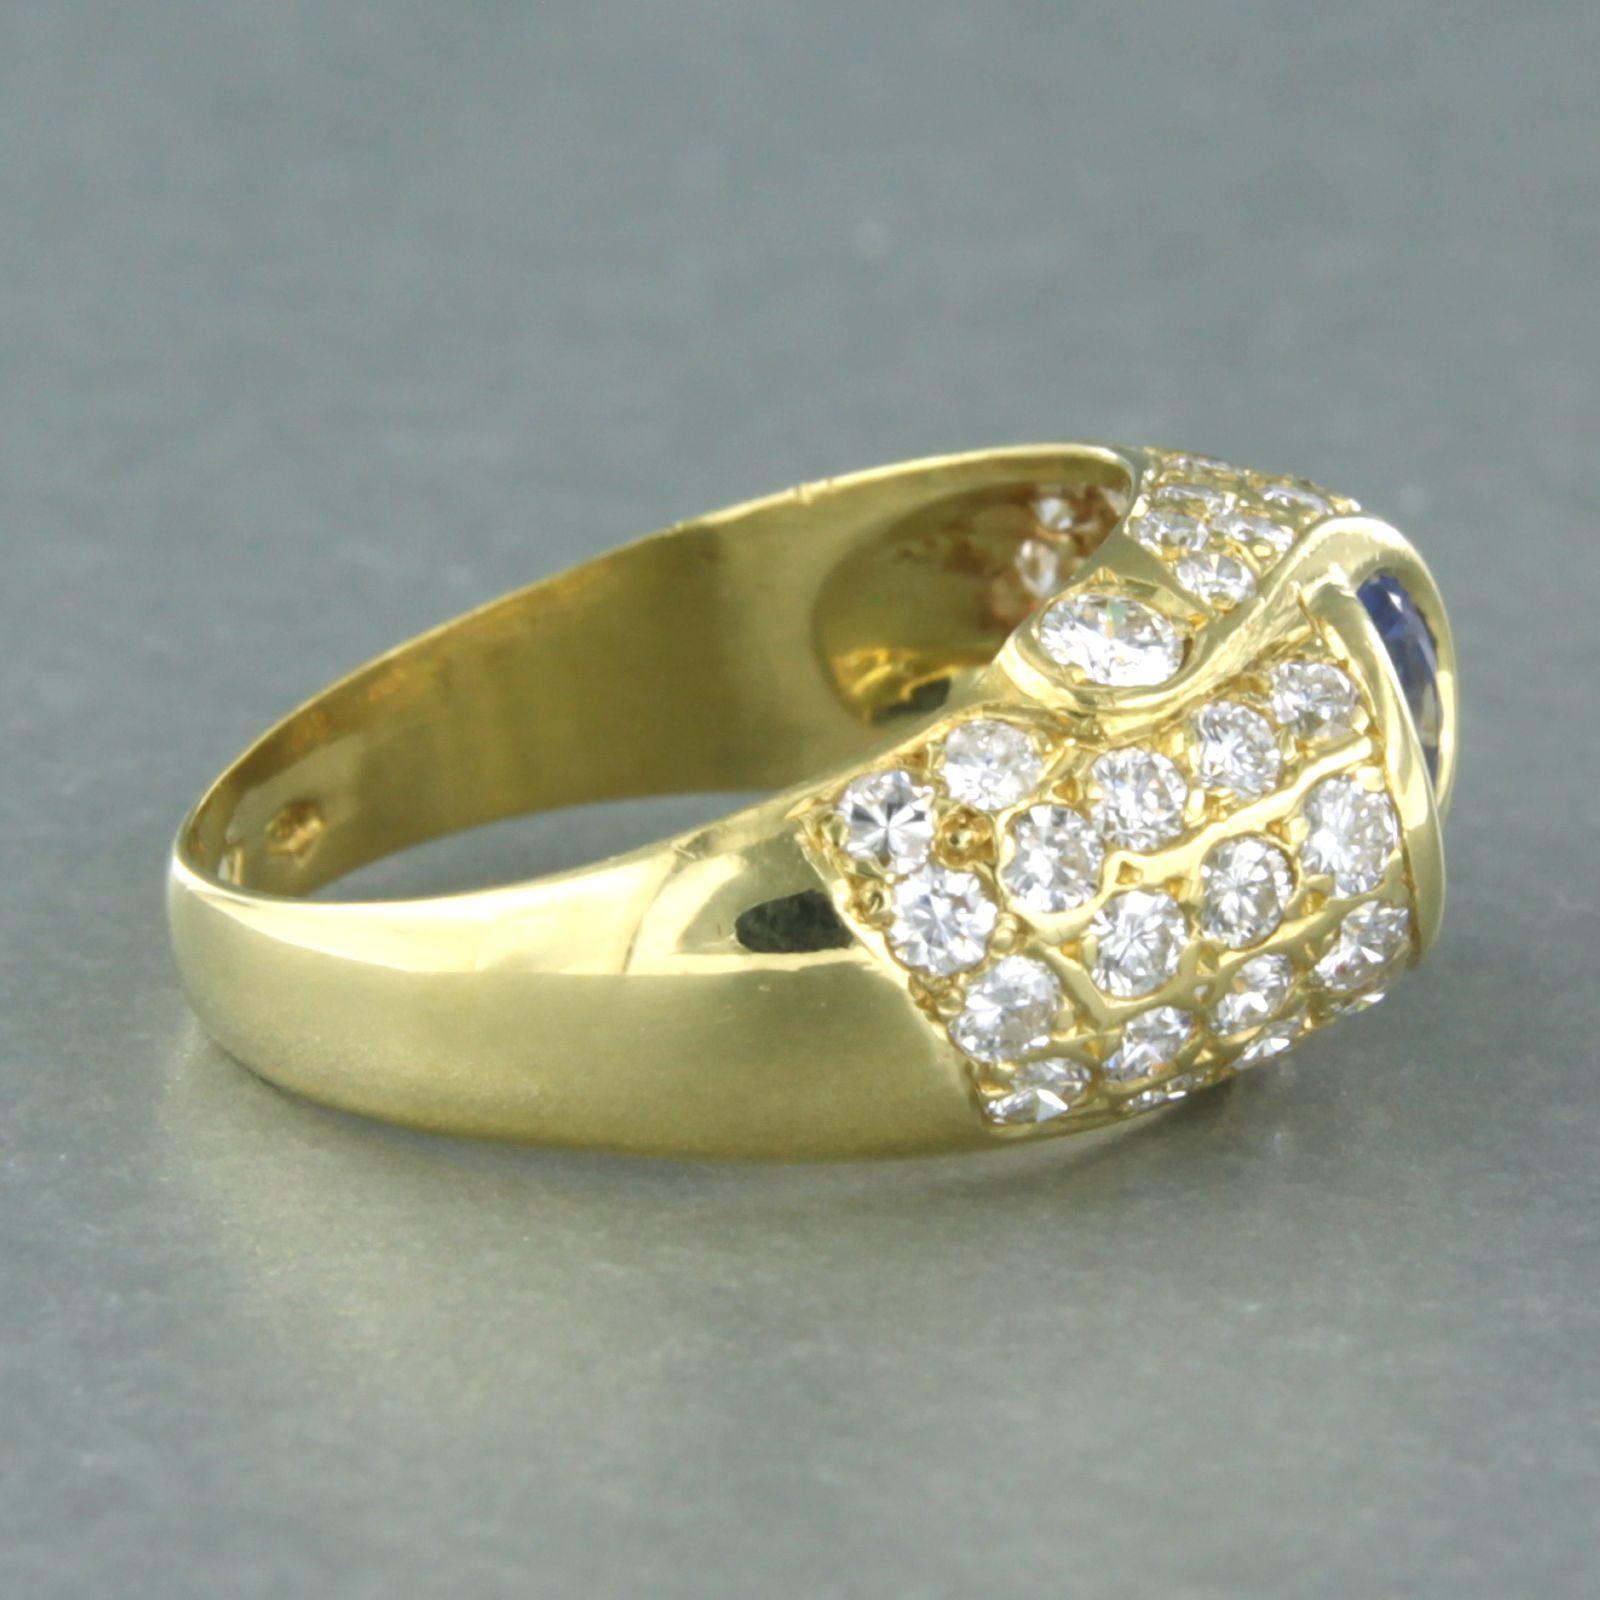 Ring with yellow and blue sapphire, and diamond, 18k gold For Sale 1